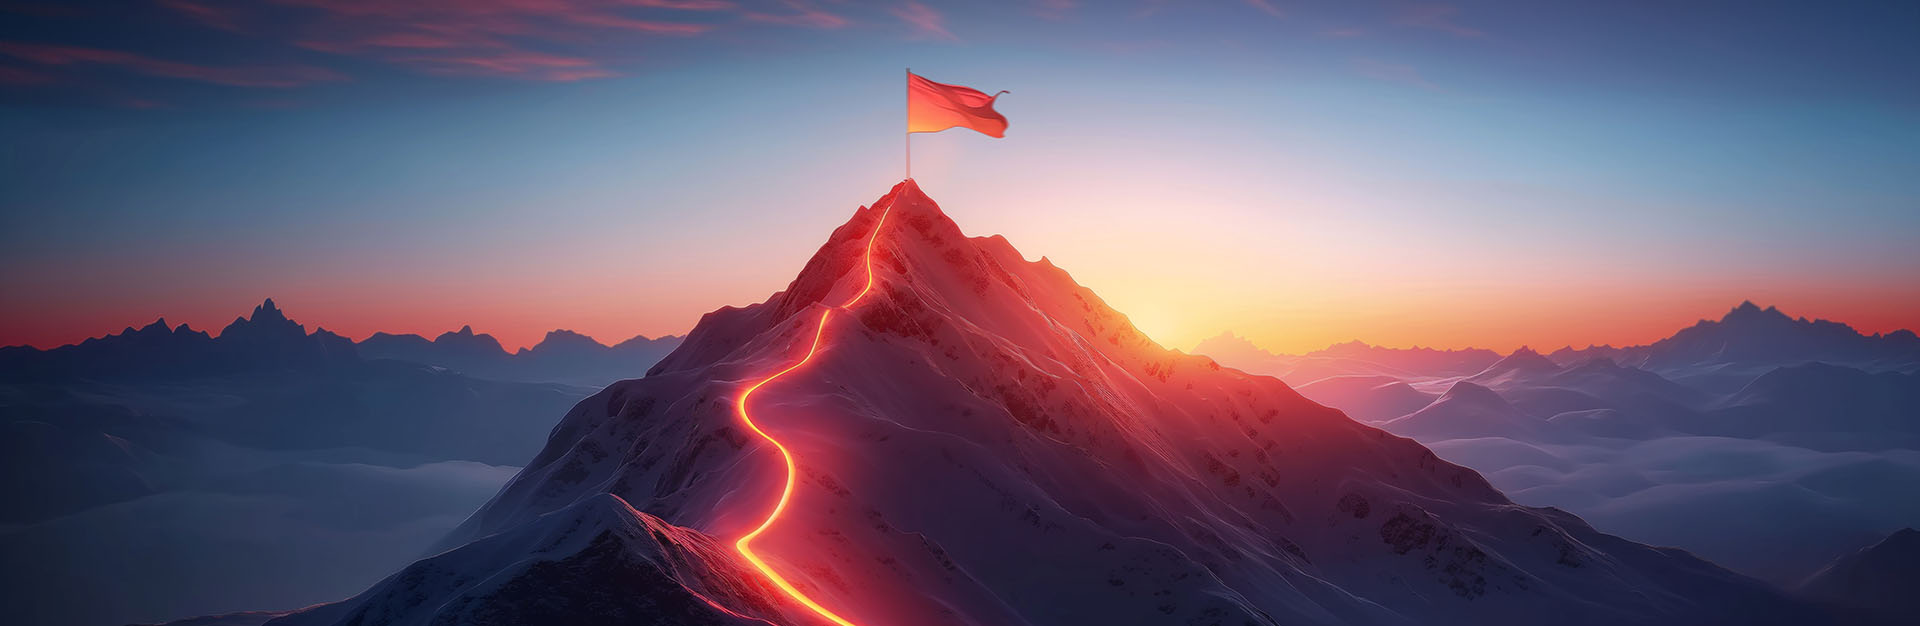 Shadow of a mountain with a flag on top representing success